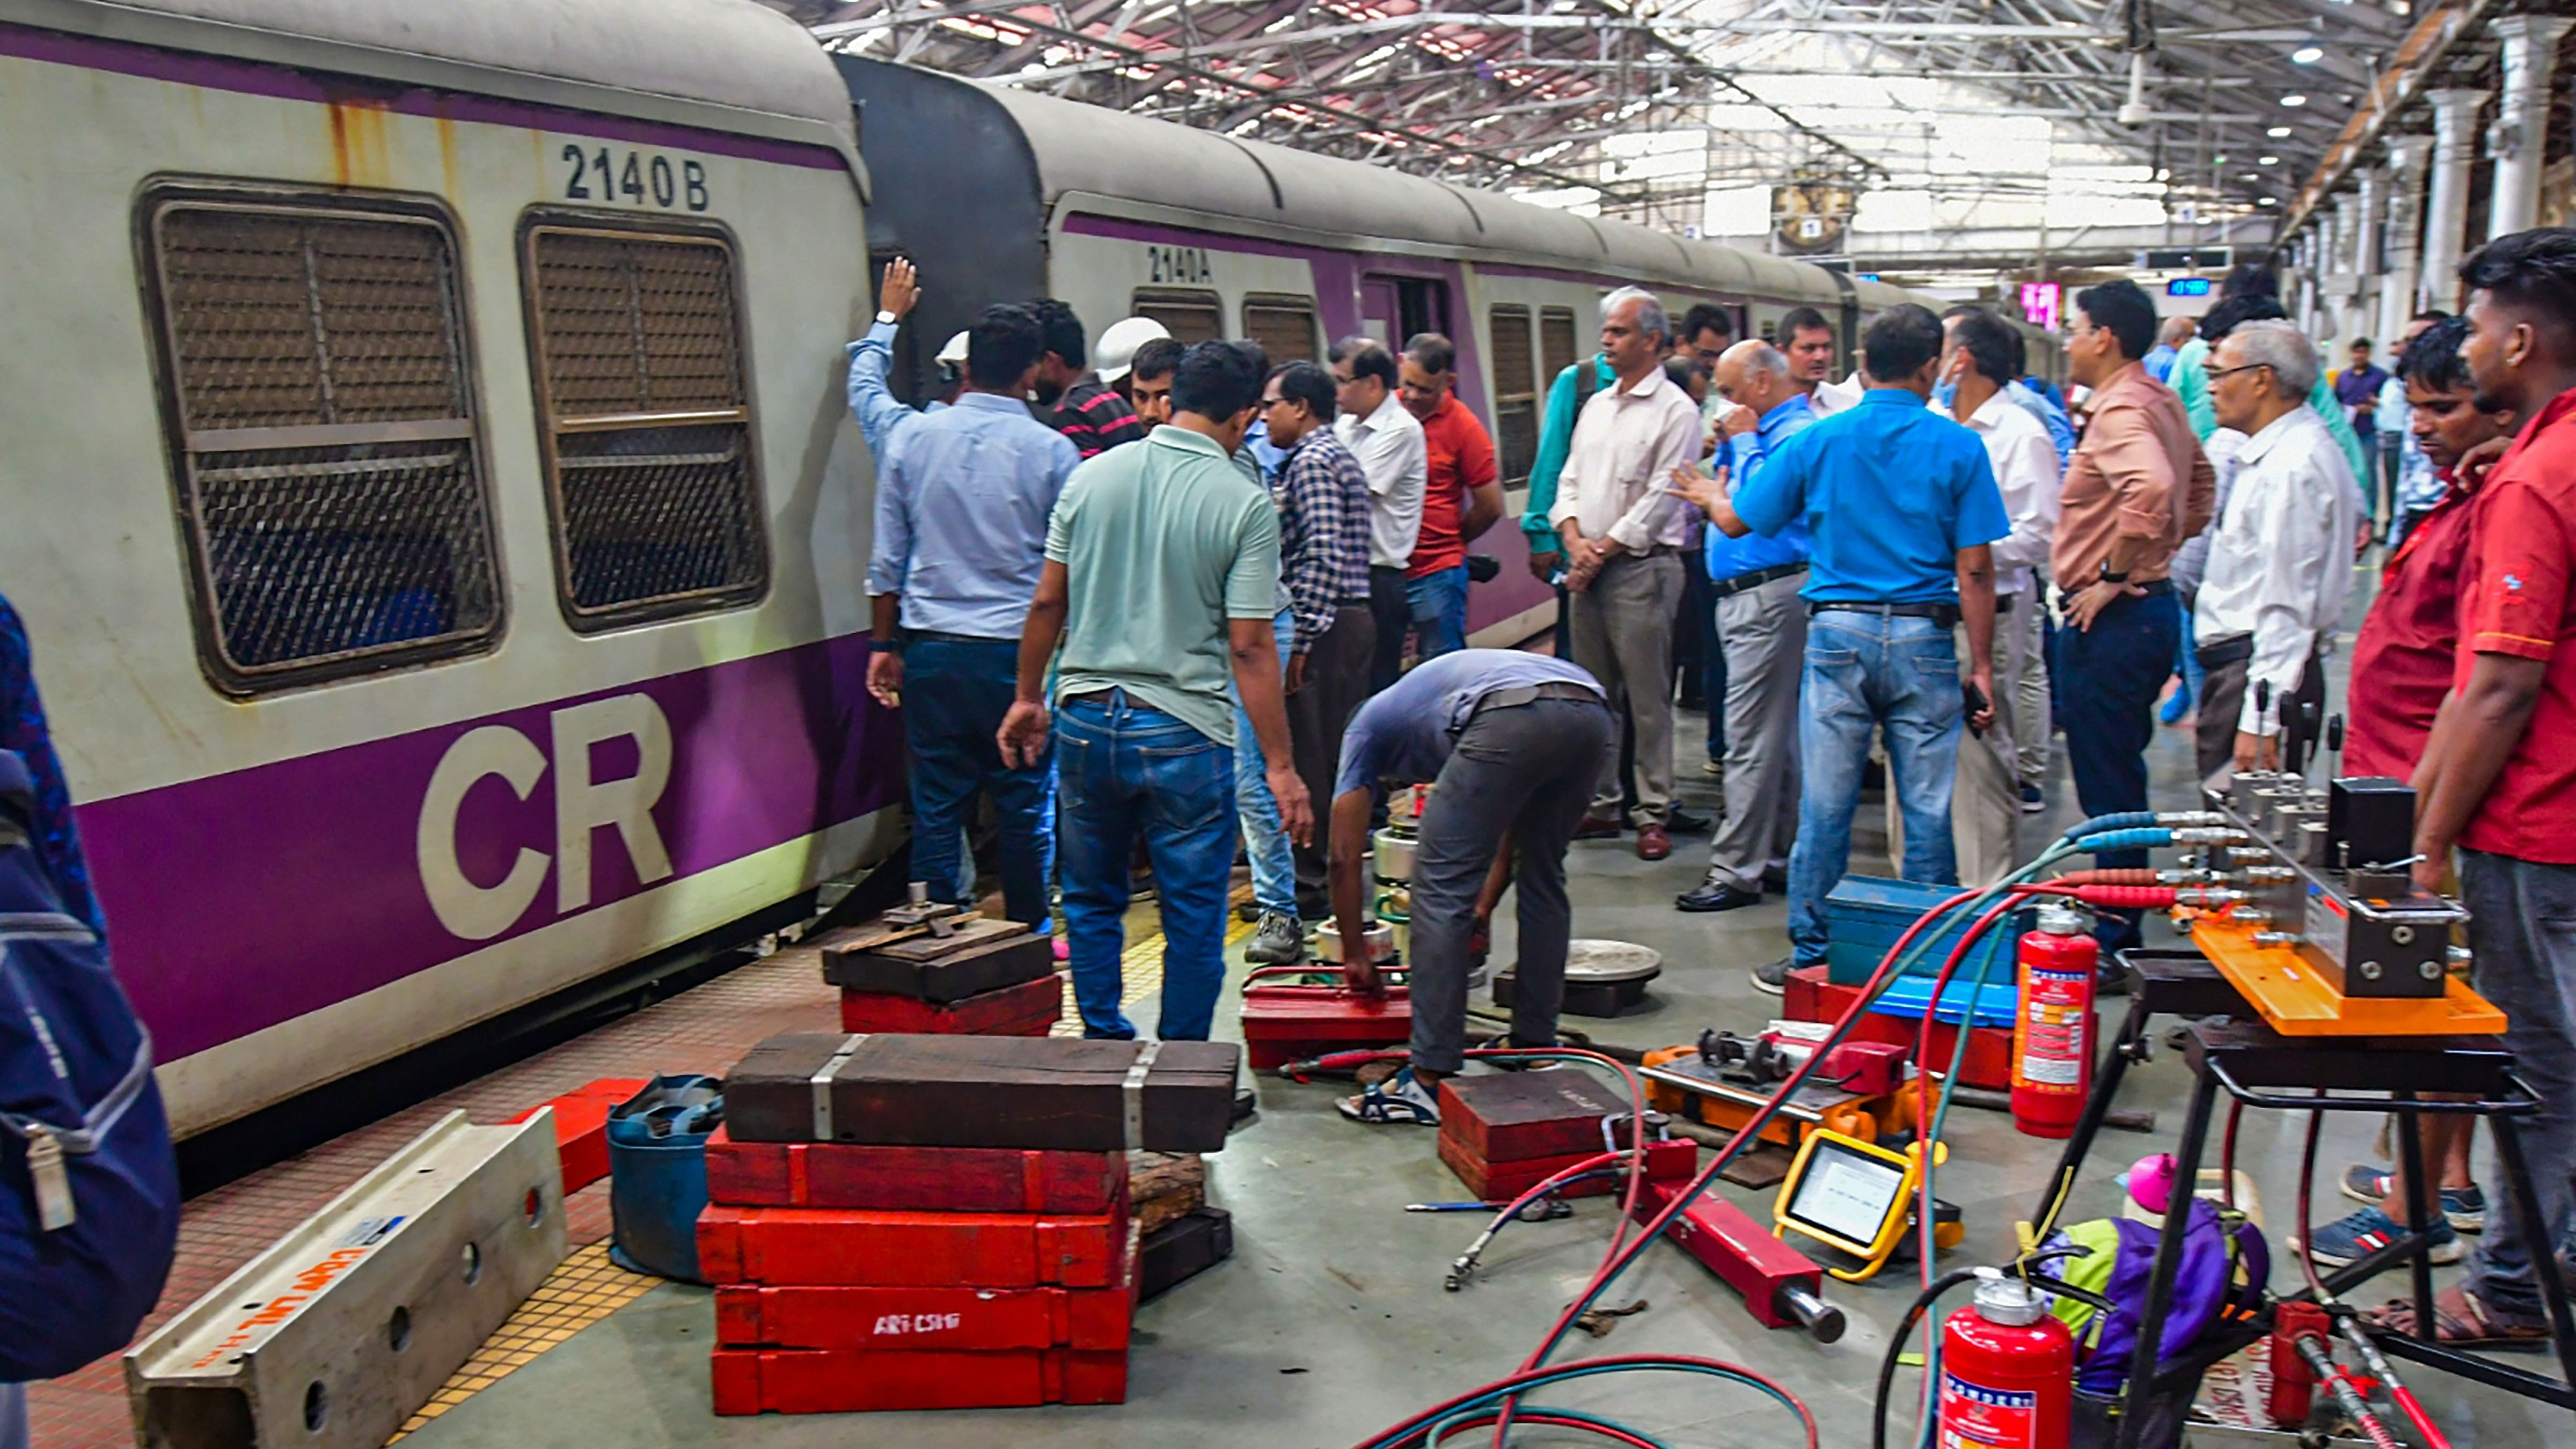 Sutar said the Panvel-bound train was given a green signal, but it moved in the opposite direction. Credit: PTI photo